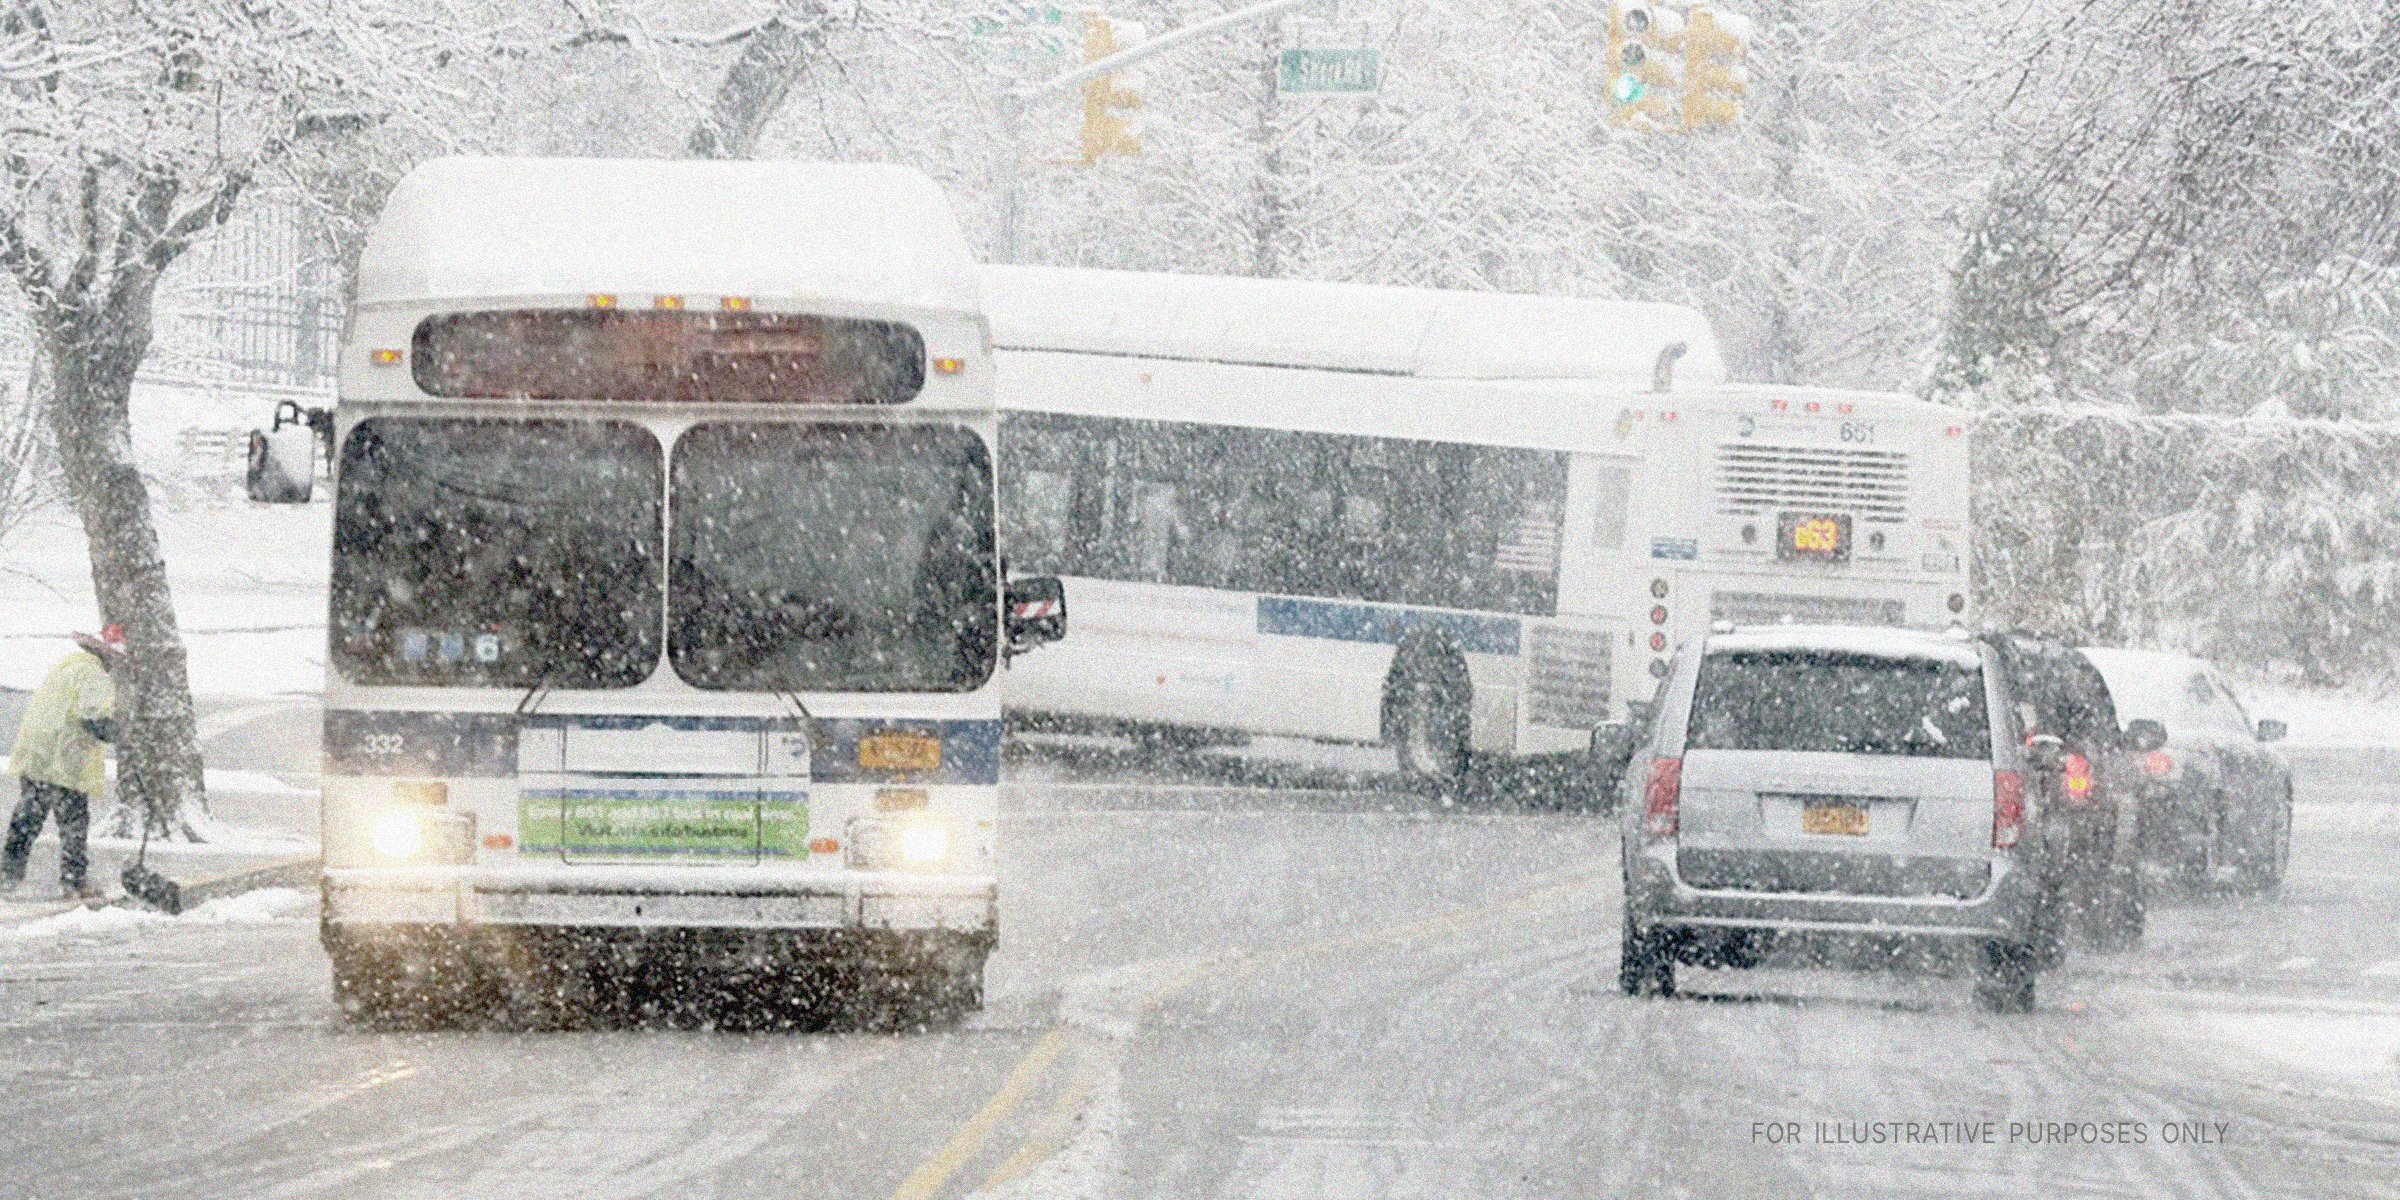 Bus and cars on a snowy day | Source: Flickr/MTAPhotos (CC BY 2.0)